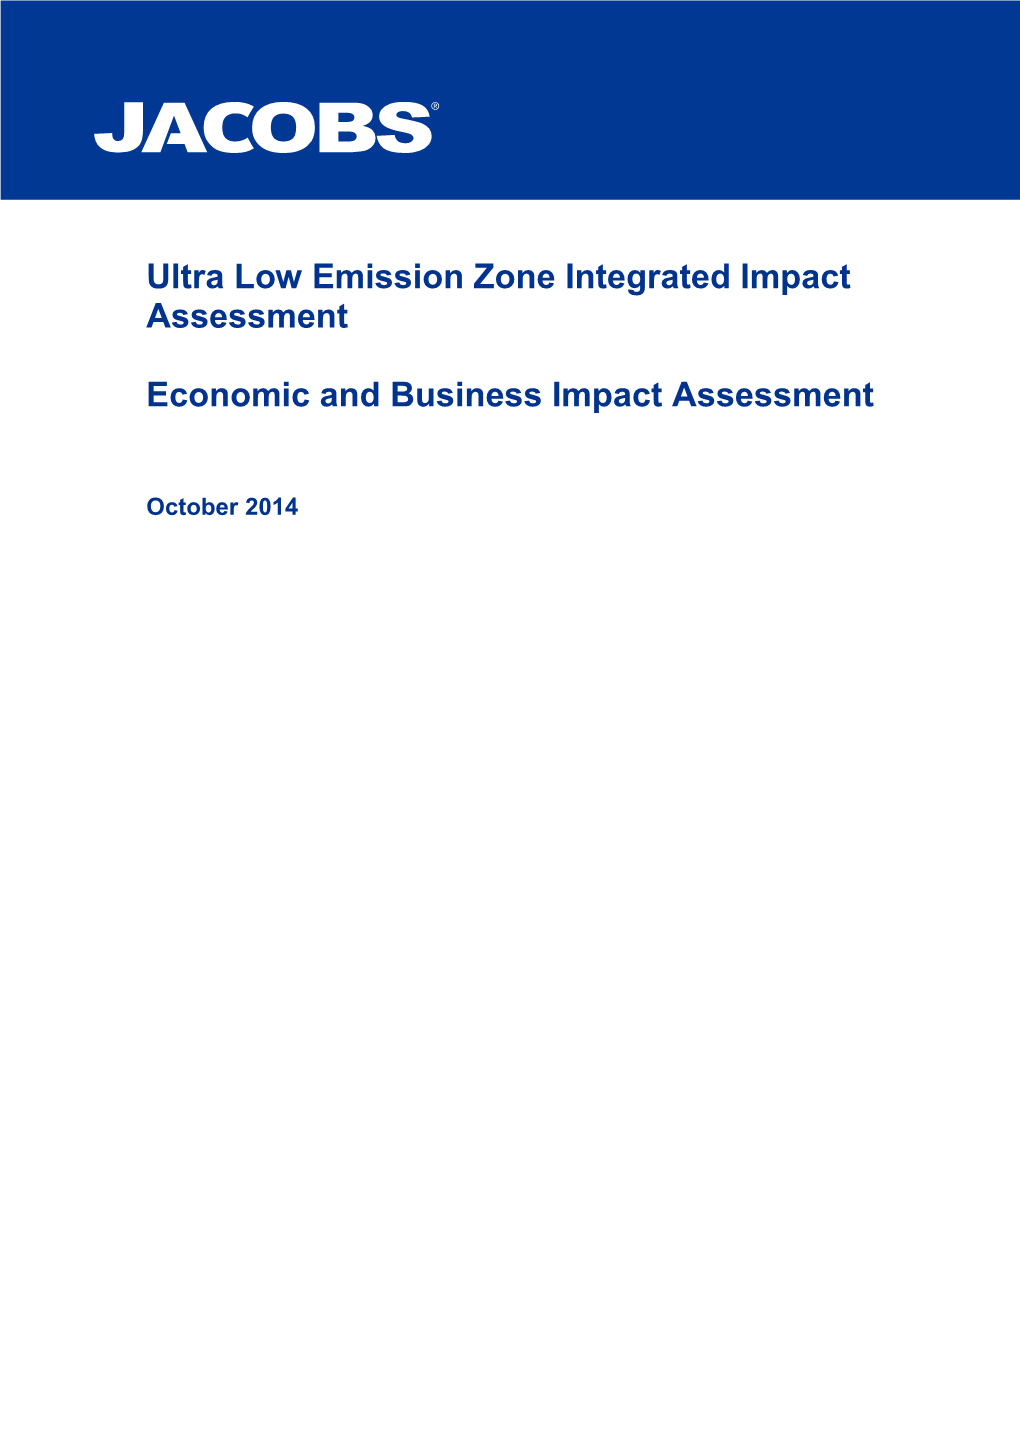 Ultra Low Emission Zone Integrated Impact Assessment Economic And